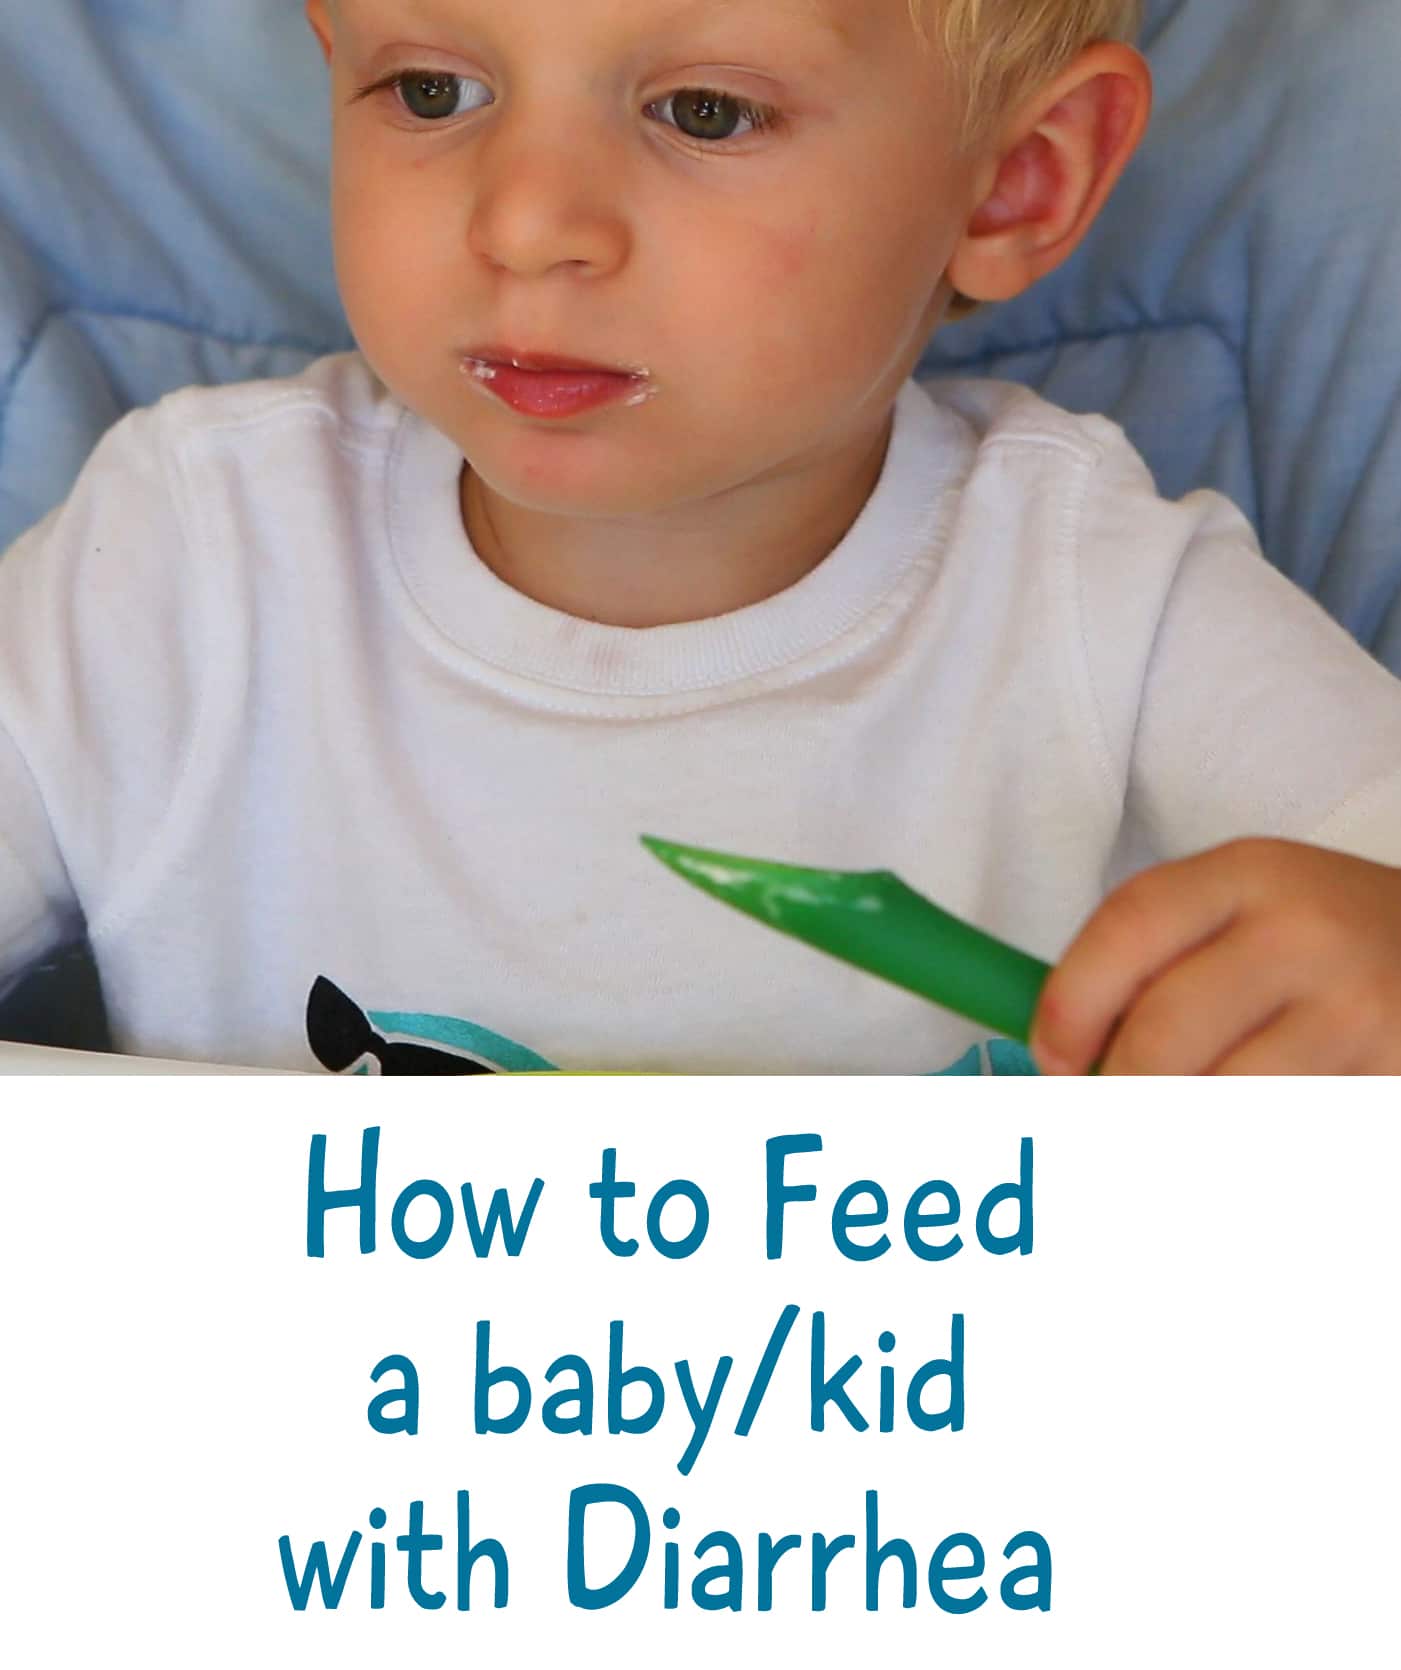 How to feed your baby or kid when they have diarrhea